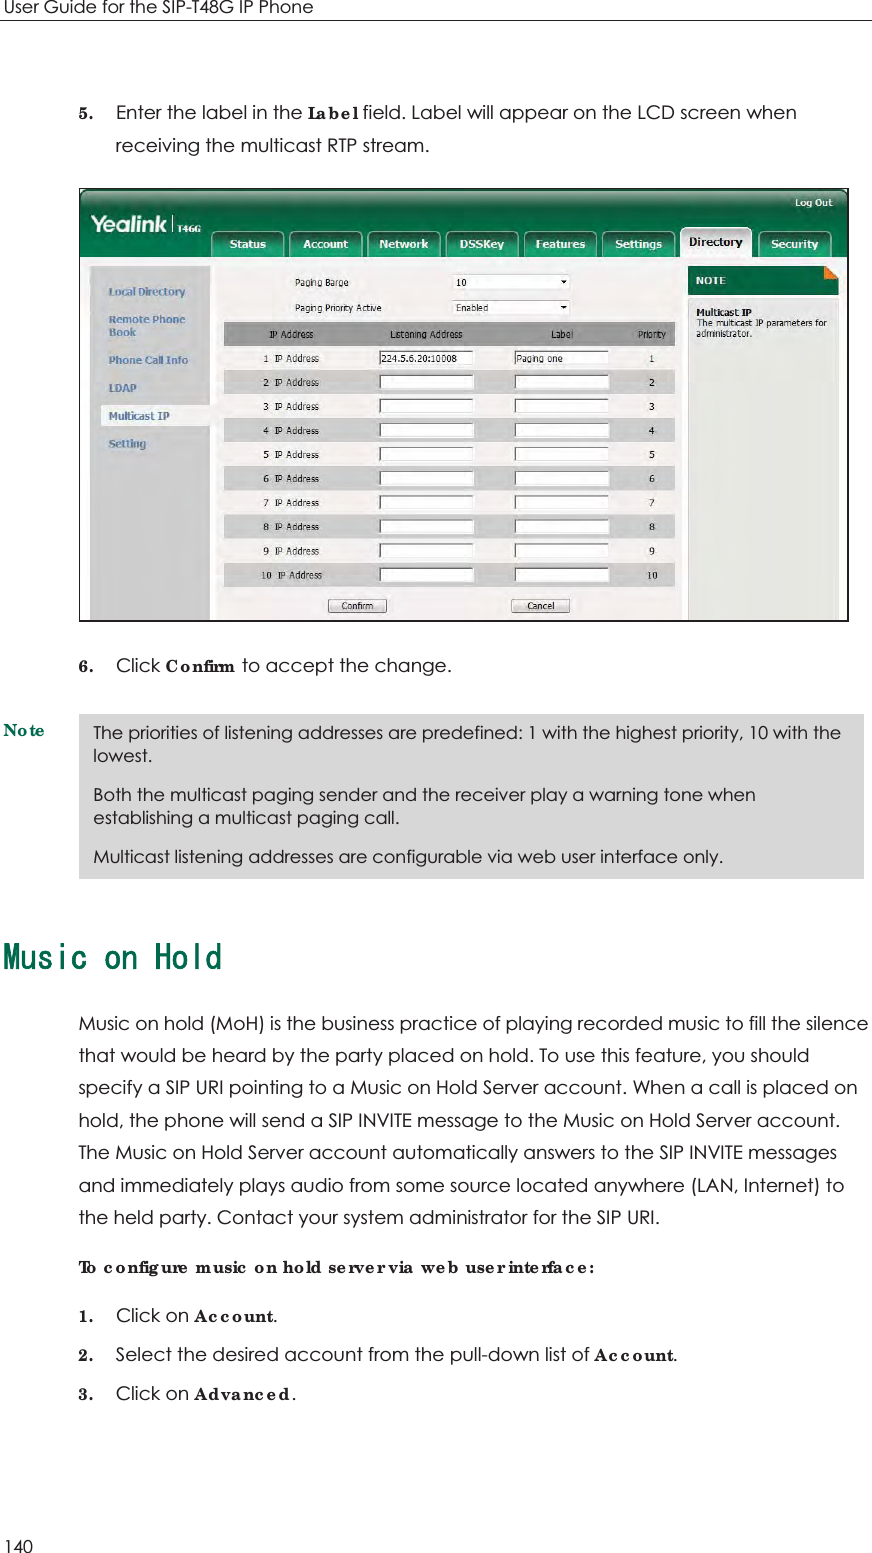 User Guide for the SIP-T48G IP Phone 140  5. Enter the label in the Label field. Label will appear on the LCD screen when receiving the multicast RTP stream.  6. Click Confirm to accept the change. Note/WUKEQP*QNFMusic on hold (MoH) is the business practice of playing recorded music to fill the silence that would be heard by the party placed on hold. To use this feature, you should specify a SIP URI pointing to a Music on Hold Server account. When a call is placed on hold, the phone will send a SIP INVITE message to the Music on Hold Server account. The Music on Hold Server account automatically answers to the SIP INVITE messages and immediately plays audio from some source located anywhere (LAN, Internet) to the held party. Contact your system administrator for the SIP URI. To configure music on hold server via web user interface: 1. Click on Account. 2. Select the desired account from the pull-down list of Account. 3. Click on Advanced. The priorities of listening addresses are predefined: 1 with the highest priority, 10 with the lowest. Both the multicast paging sender and the receiver play a warning tone when establishing a multicast paging call. Multicast listening addresses are configurable via web user interface only. 